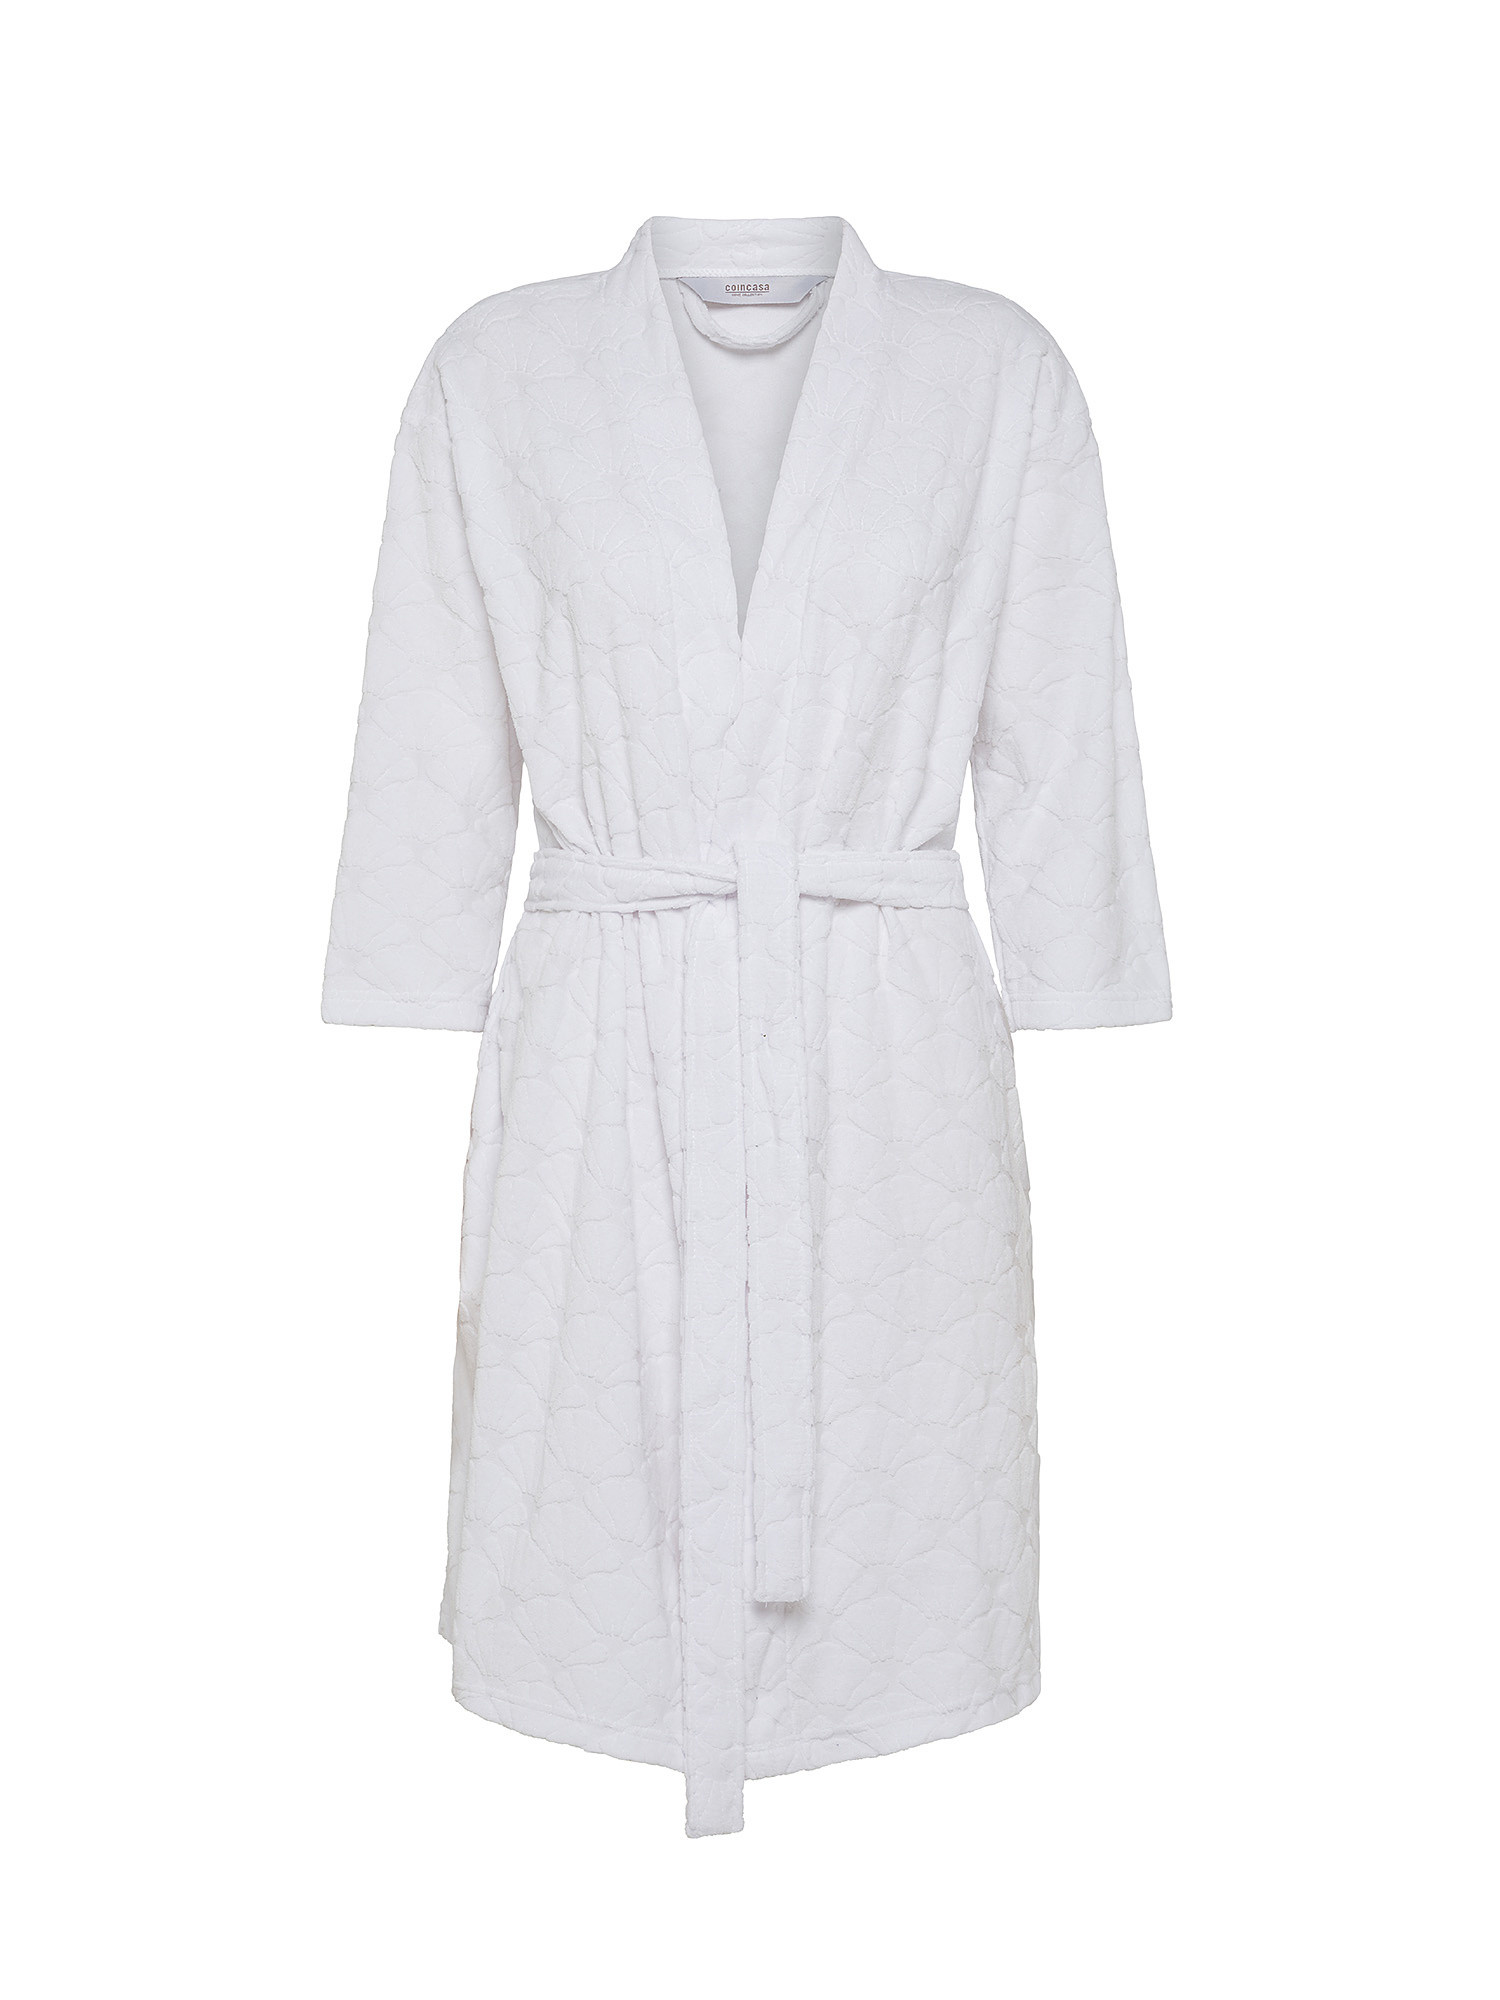 Terry cotton dressing gown with fans motif, White, large image number 0